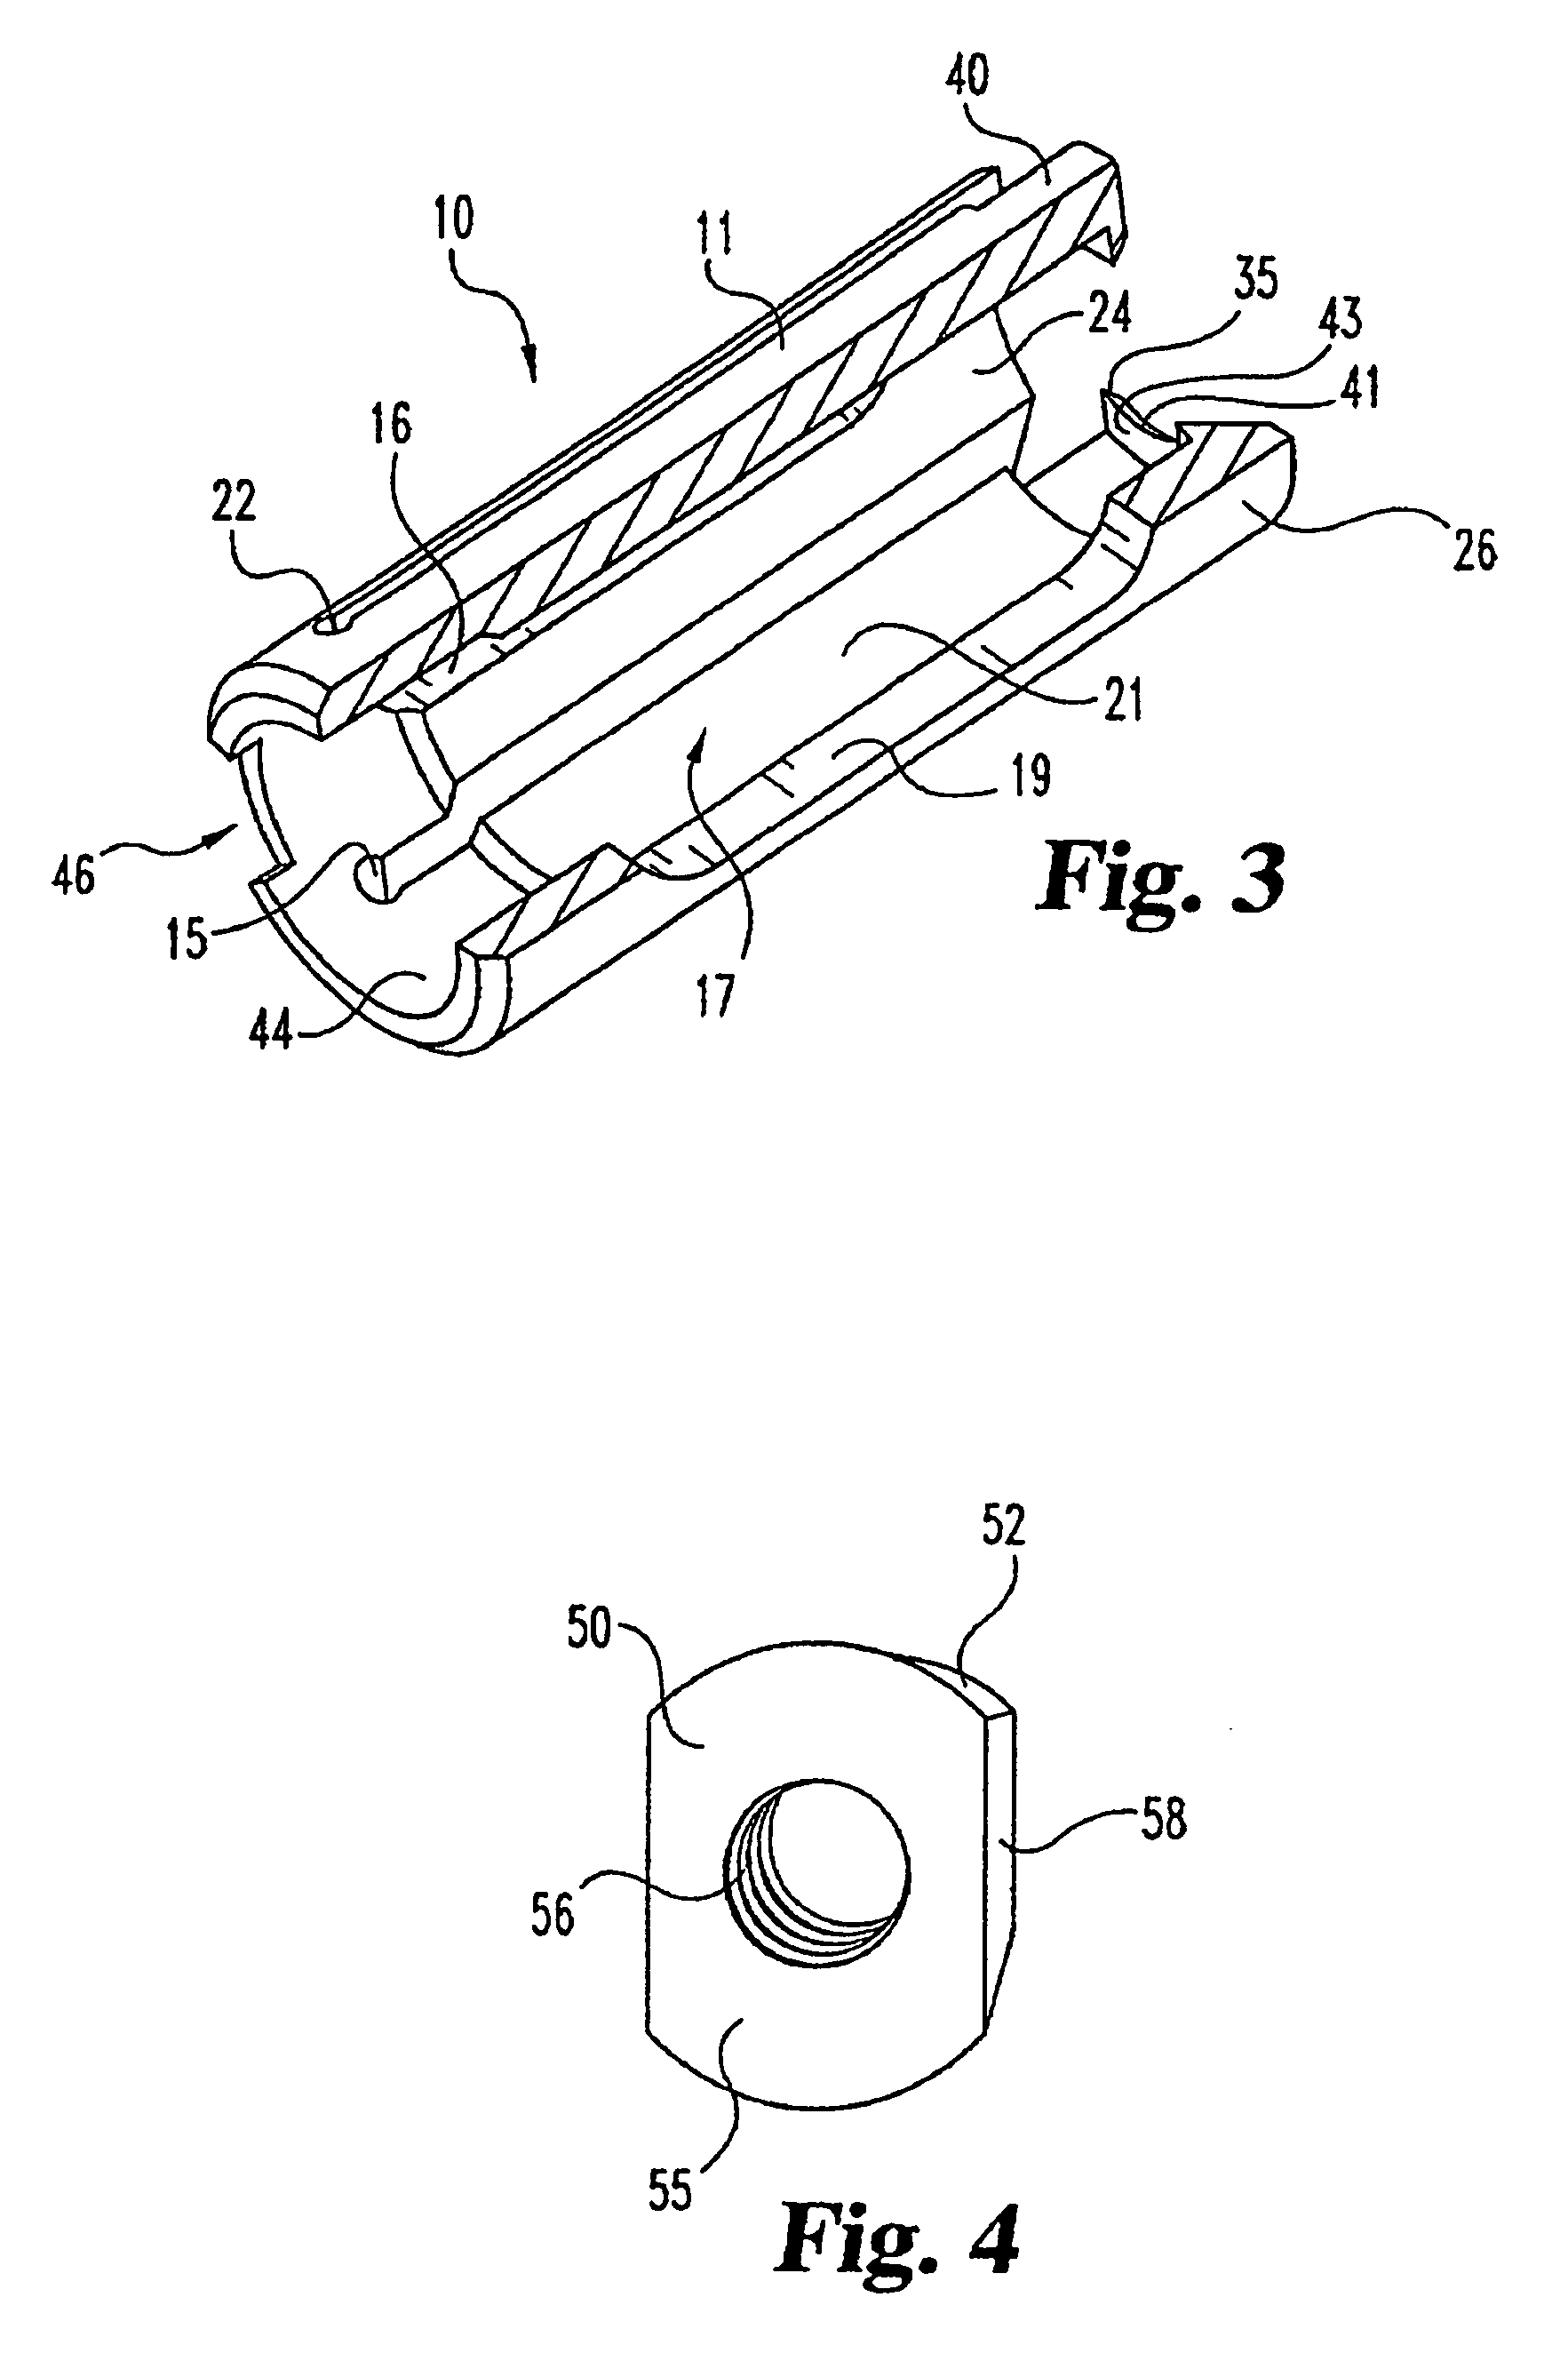 Expandable interbody fusion cage